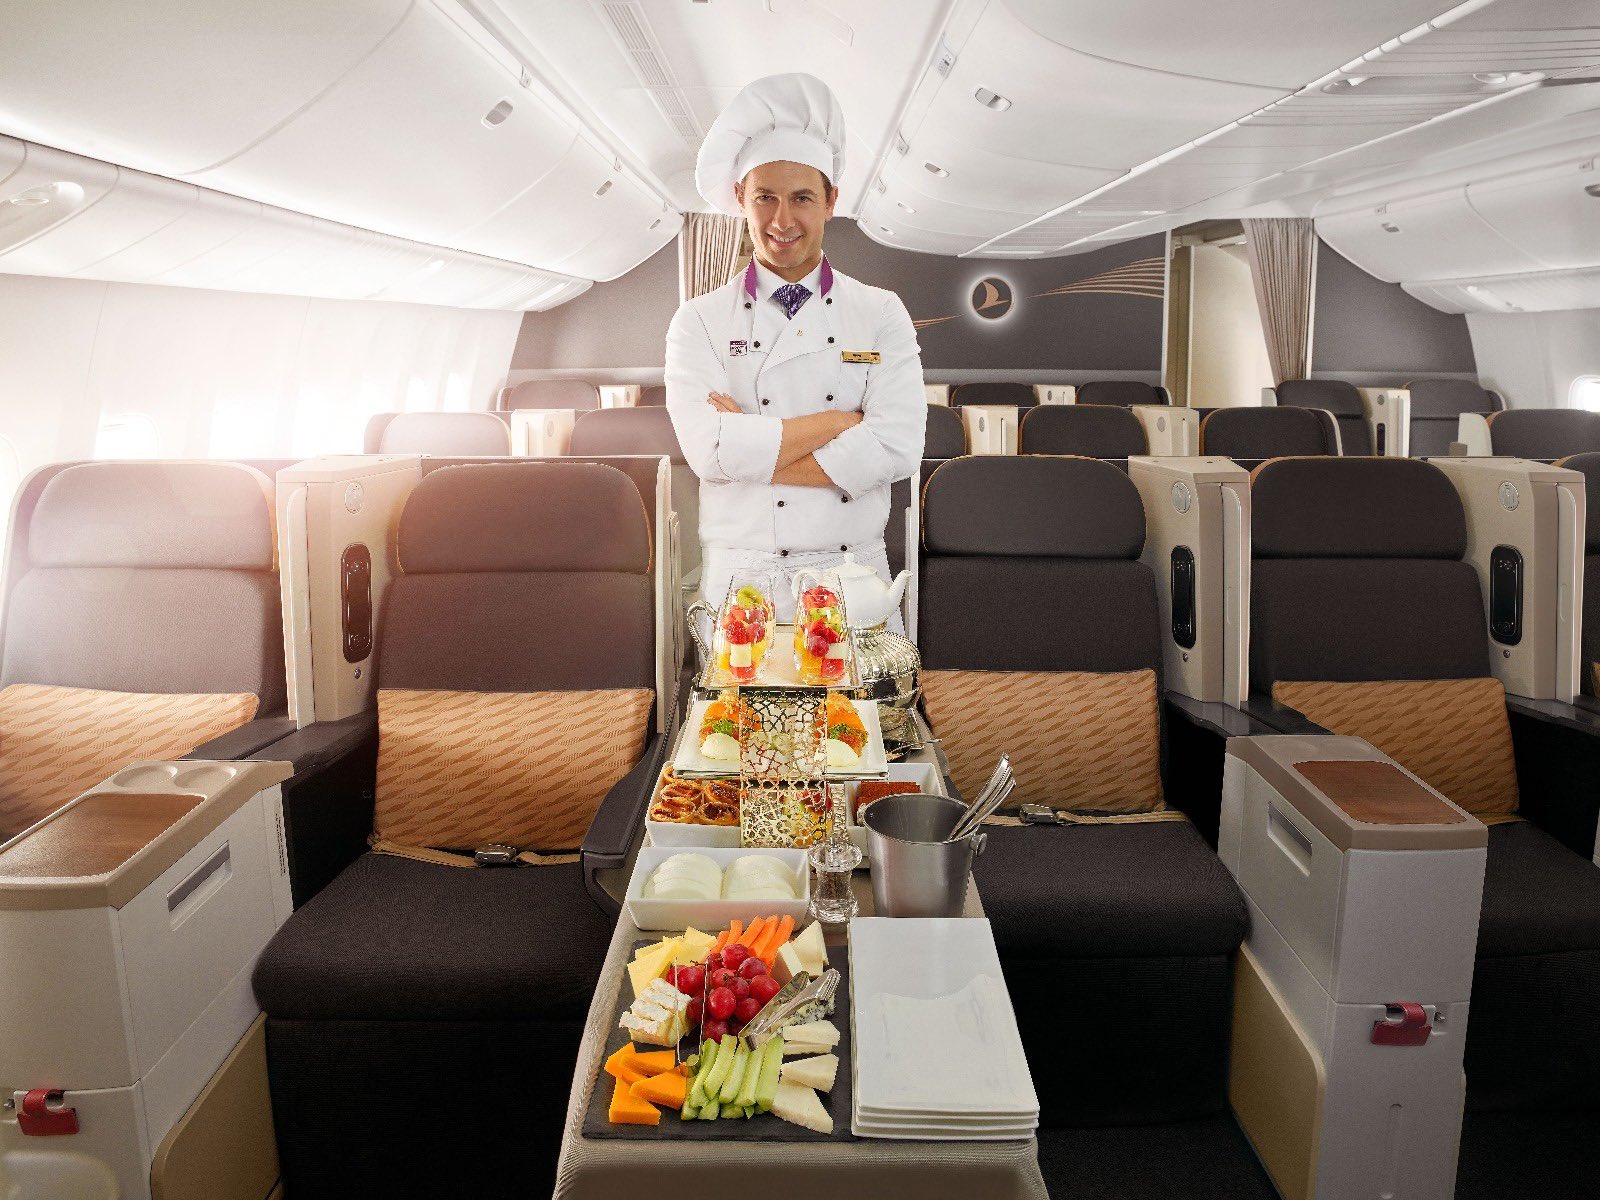 a man in a chef uniform standing in an airplane